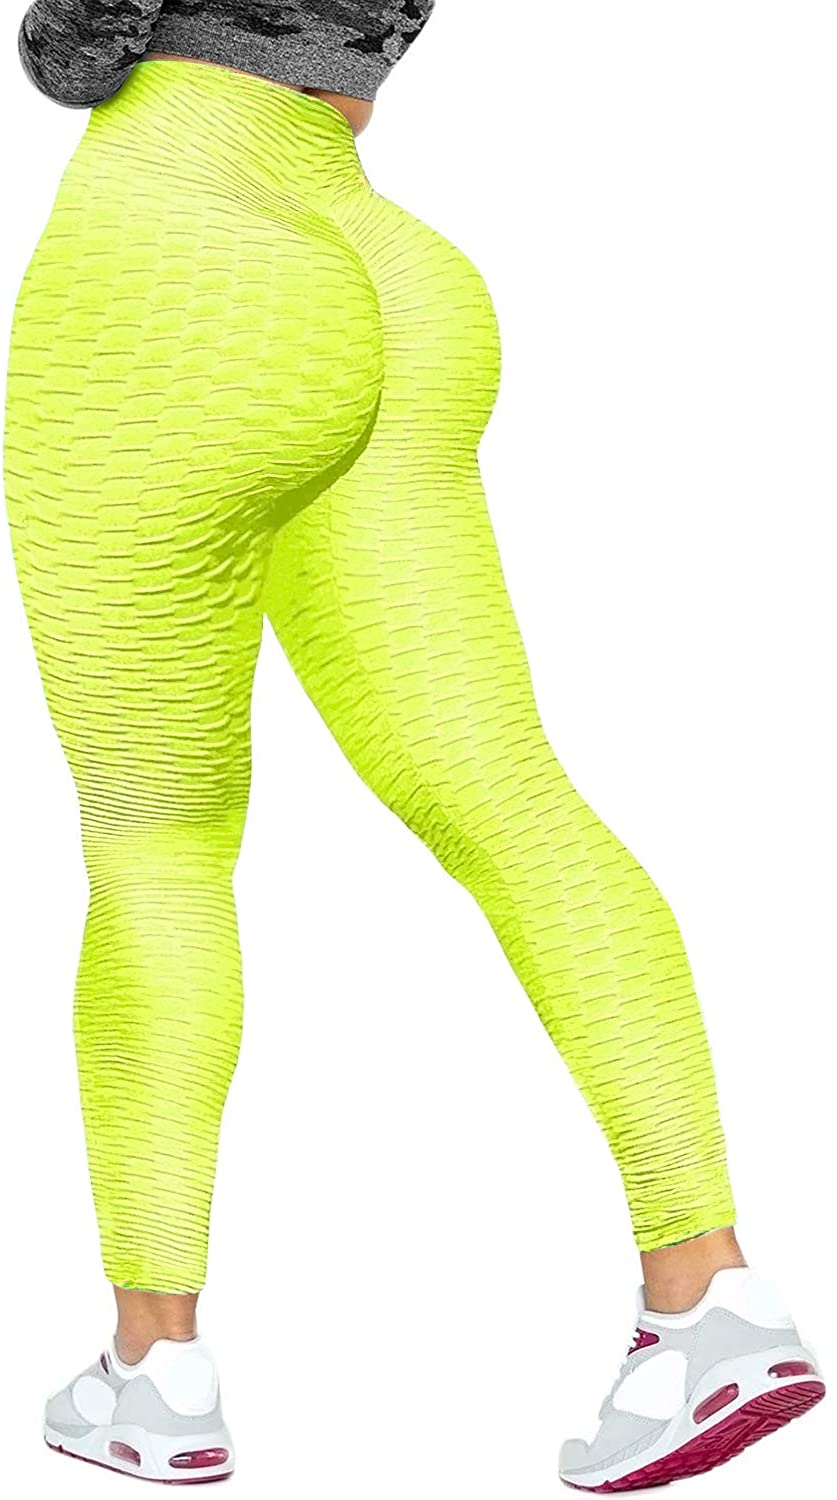 Anti Cellulite Compression Green Gym Leggings For Women 2019 Fashionable  Slim Fit With Butt Lift And Elastic Fit BS88 MX190717 From Buyocean01,  $8.56